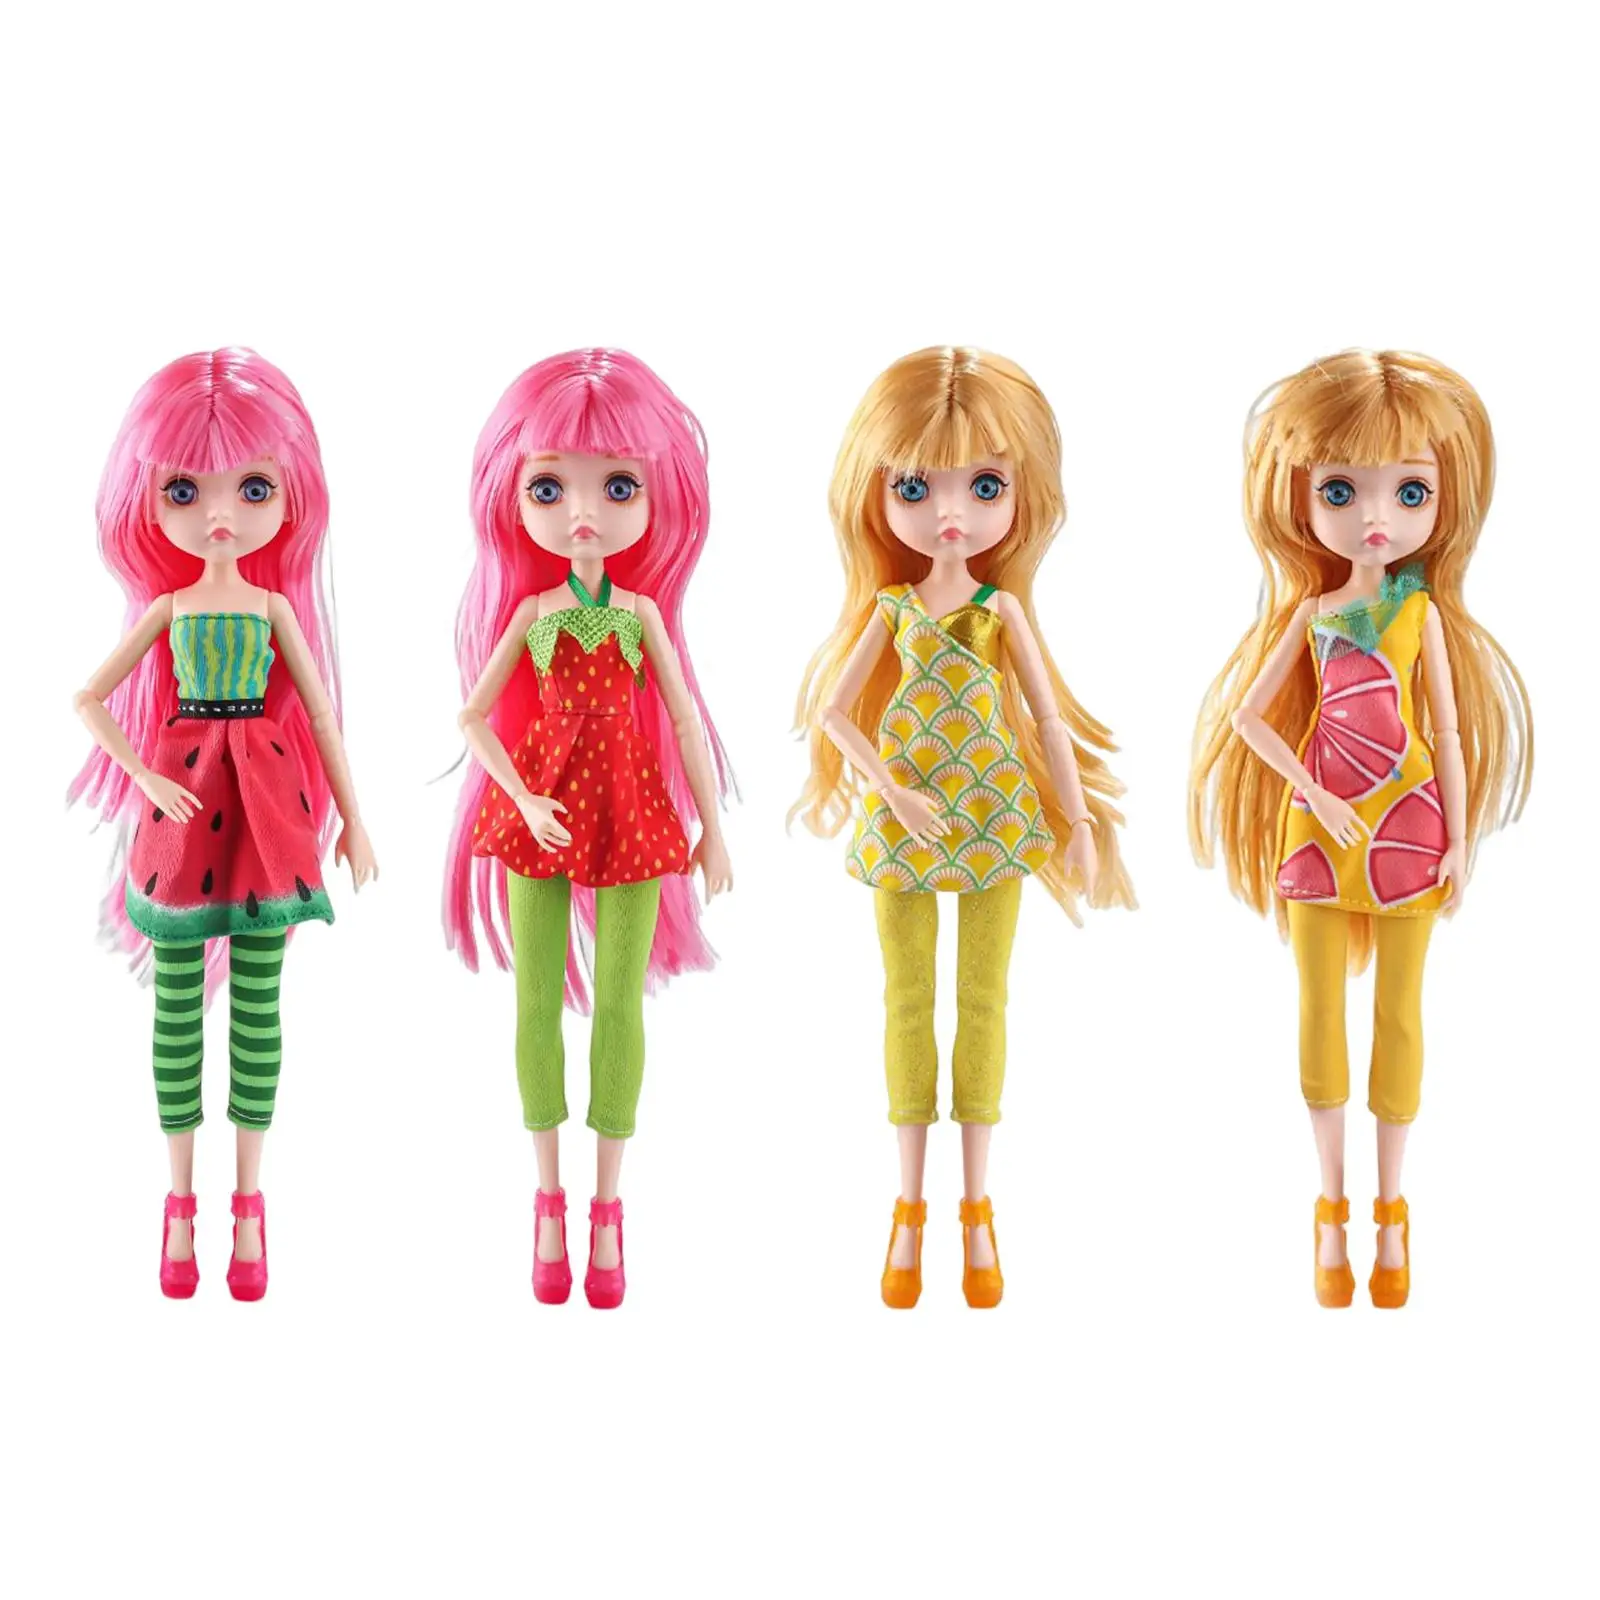 30cm Fashion Doll with Clothes and Shoes Moveable Joints 9 Flexible Joints 3D Eyes Lovely Dress up for 3 4 Girls 6 7 8 Gifts